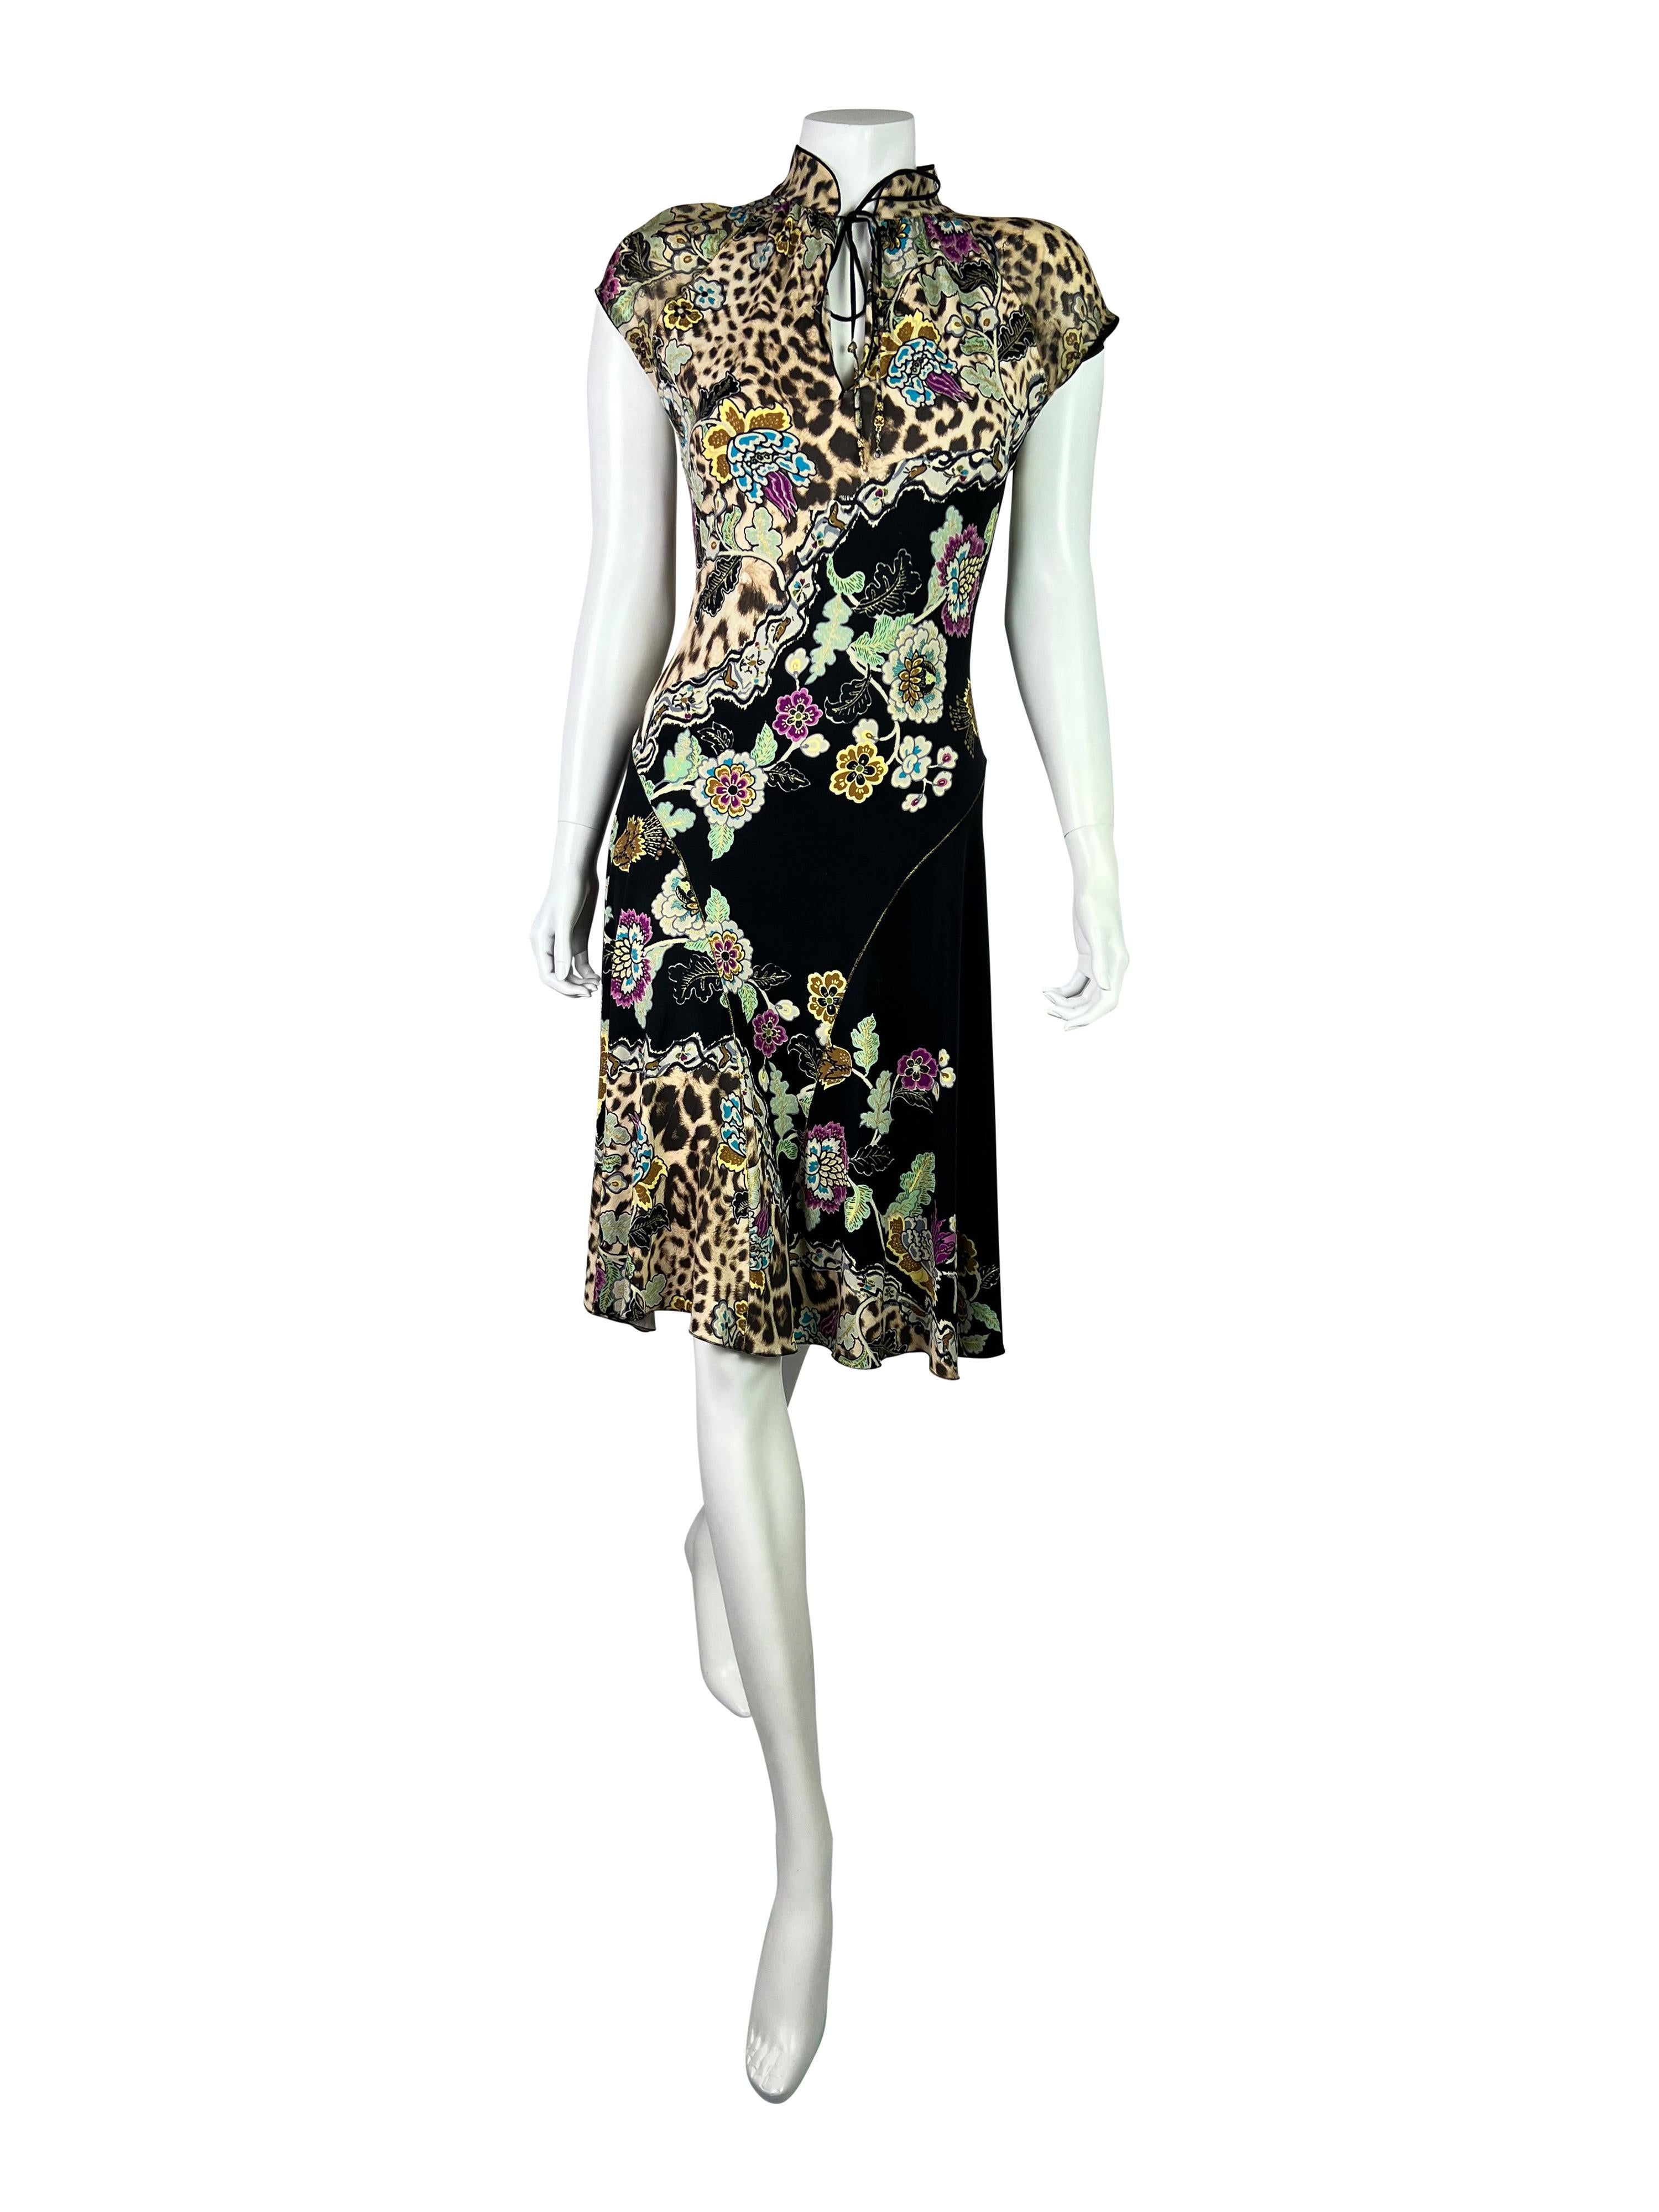 SS 2003 Roberto Cavalli Chinoiserie Dress In Excellent Condition For Sale In Prague, CZ